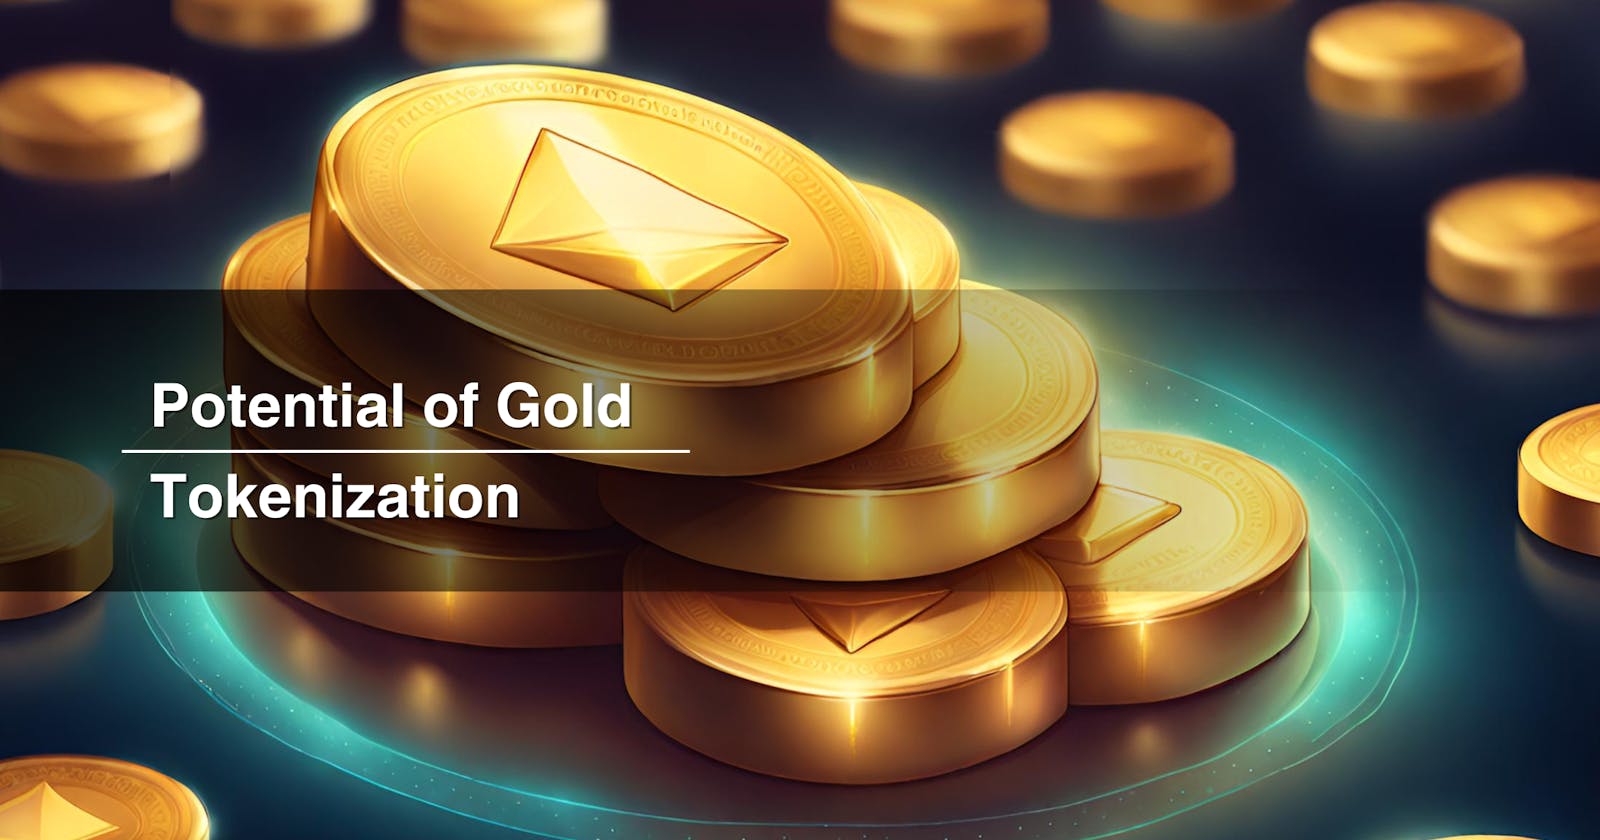 Potential of Gold Tokenization: Investment Strategies in the Modern Economy